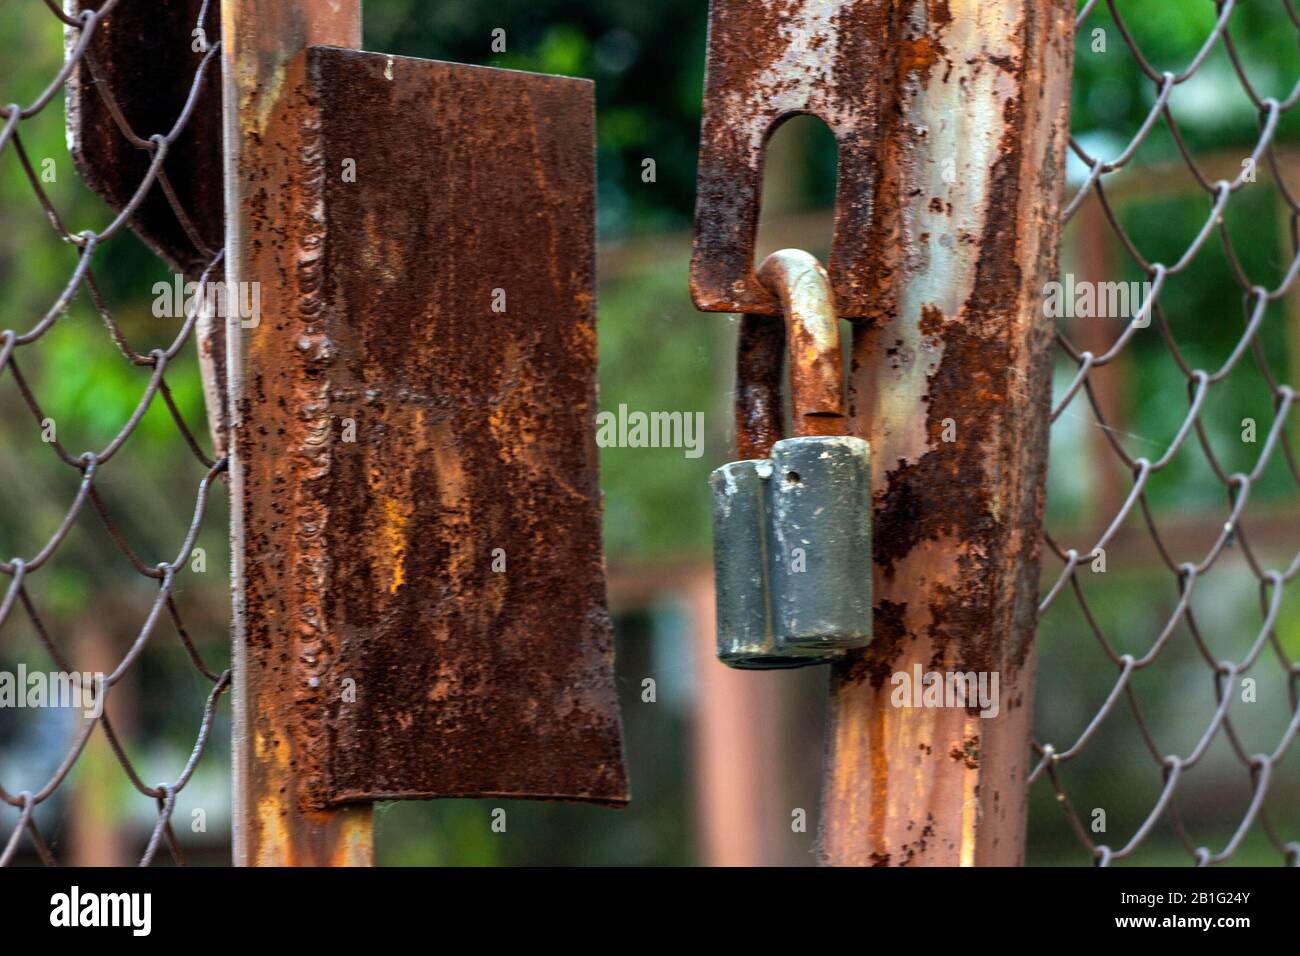 Rusty old lock. Locked padlock on metal grate. Concept - stolen things or unsecure data system Stock Photo